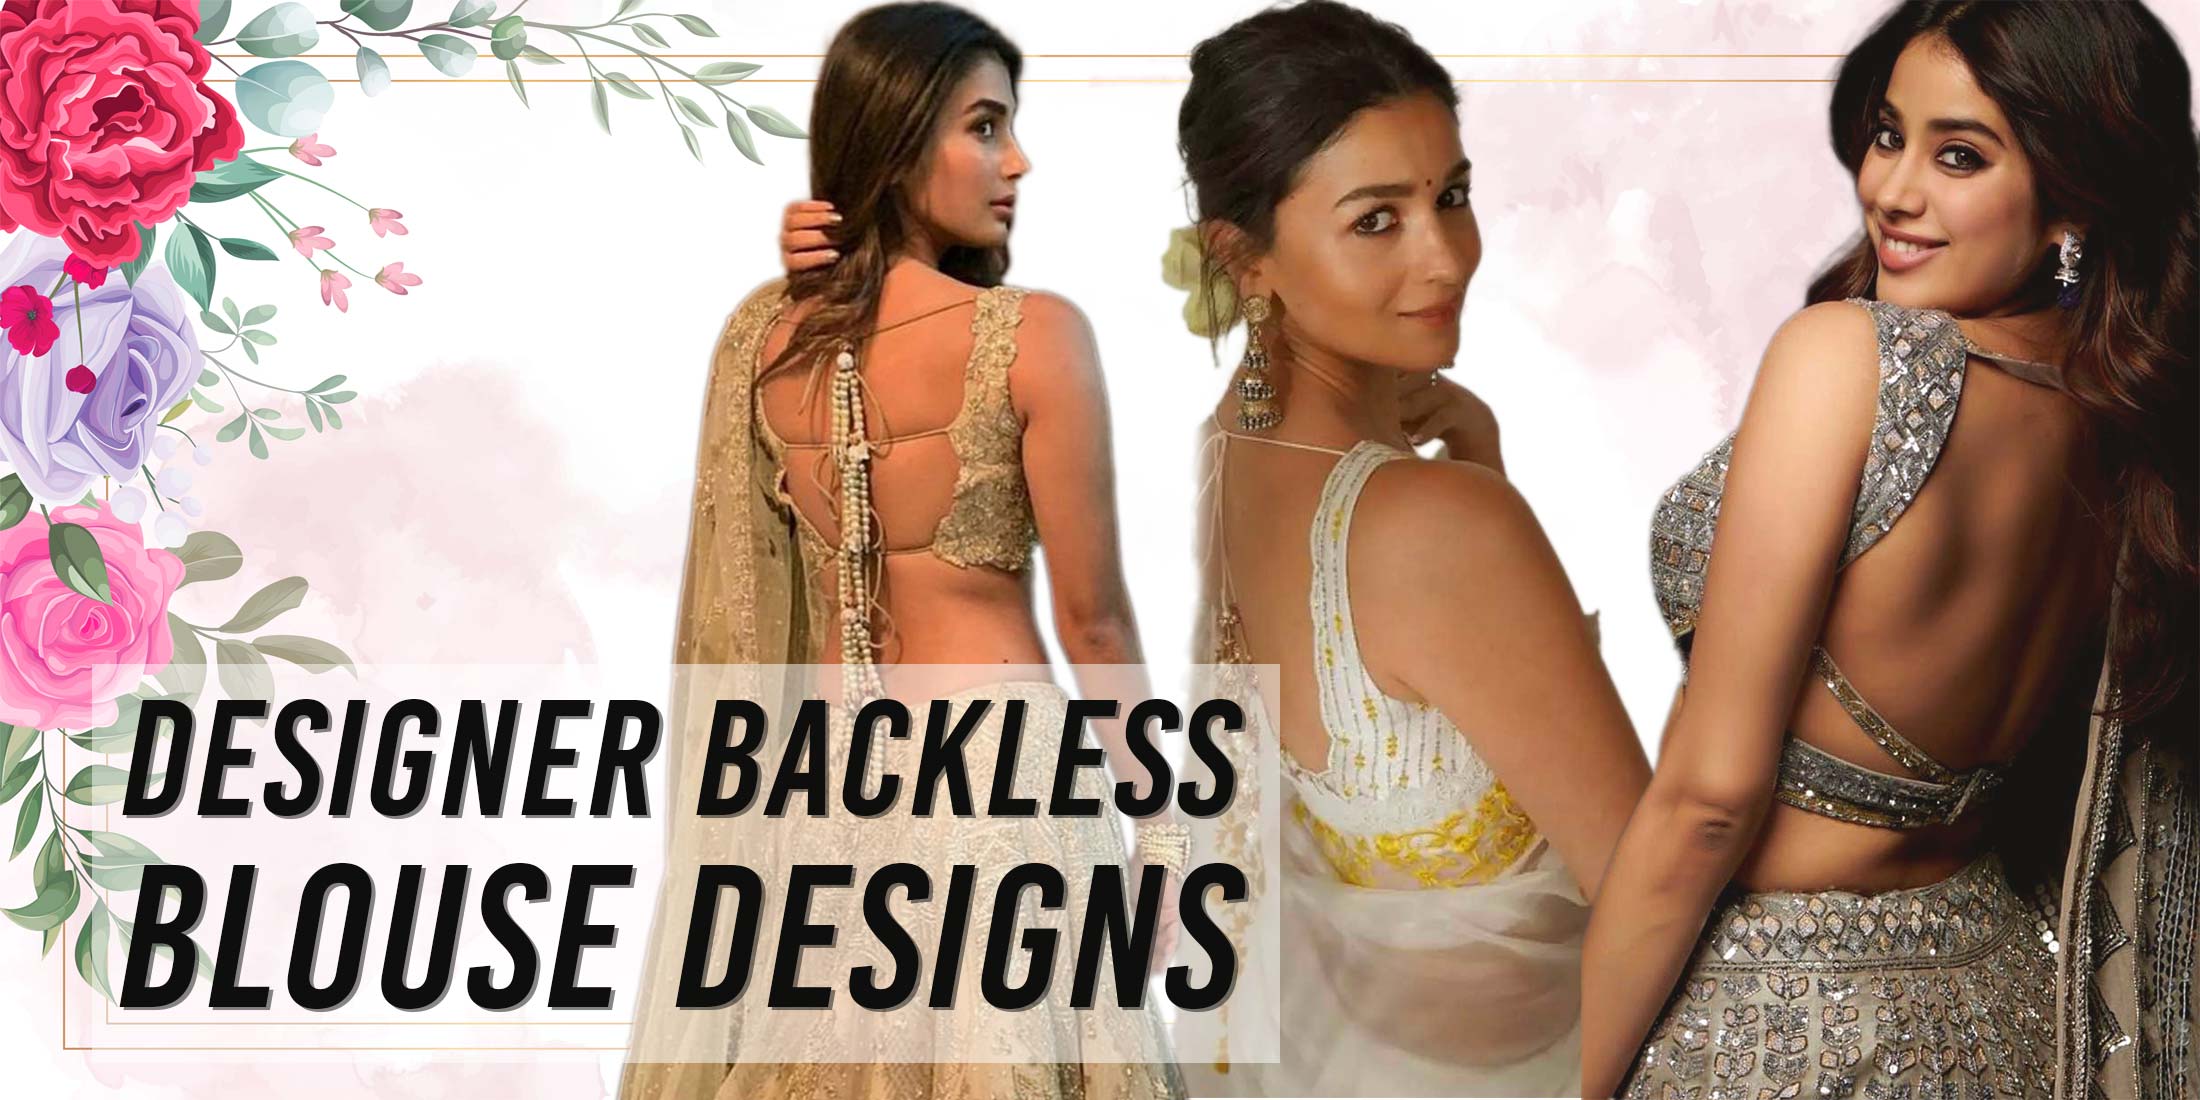 Why do women nowadays prefer wearing backless blouses more with a